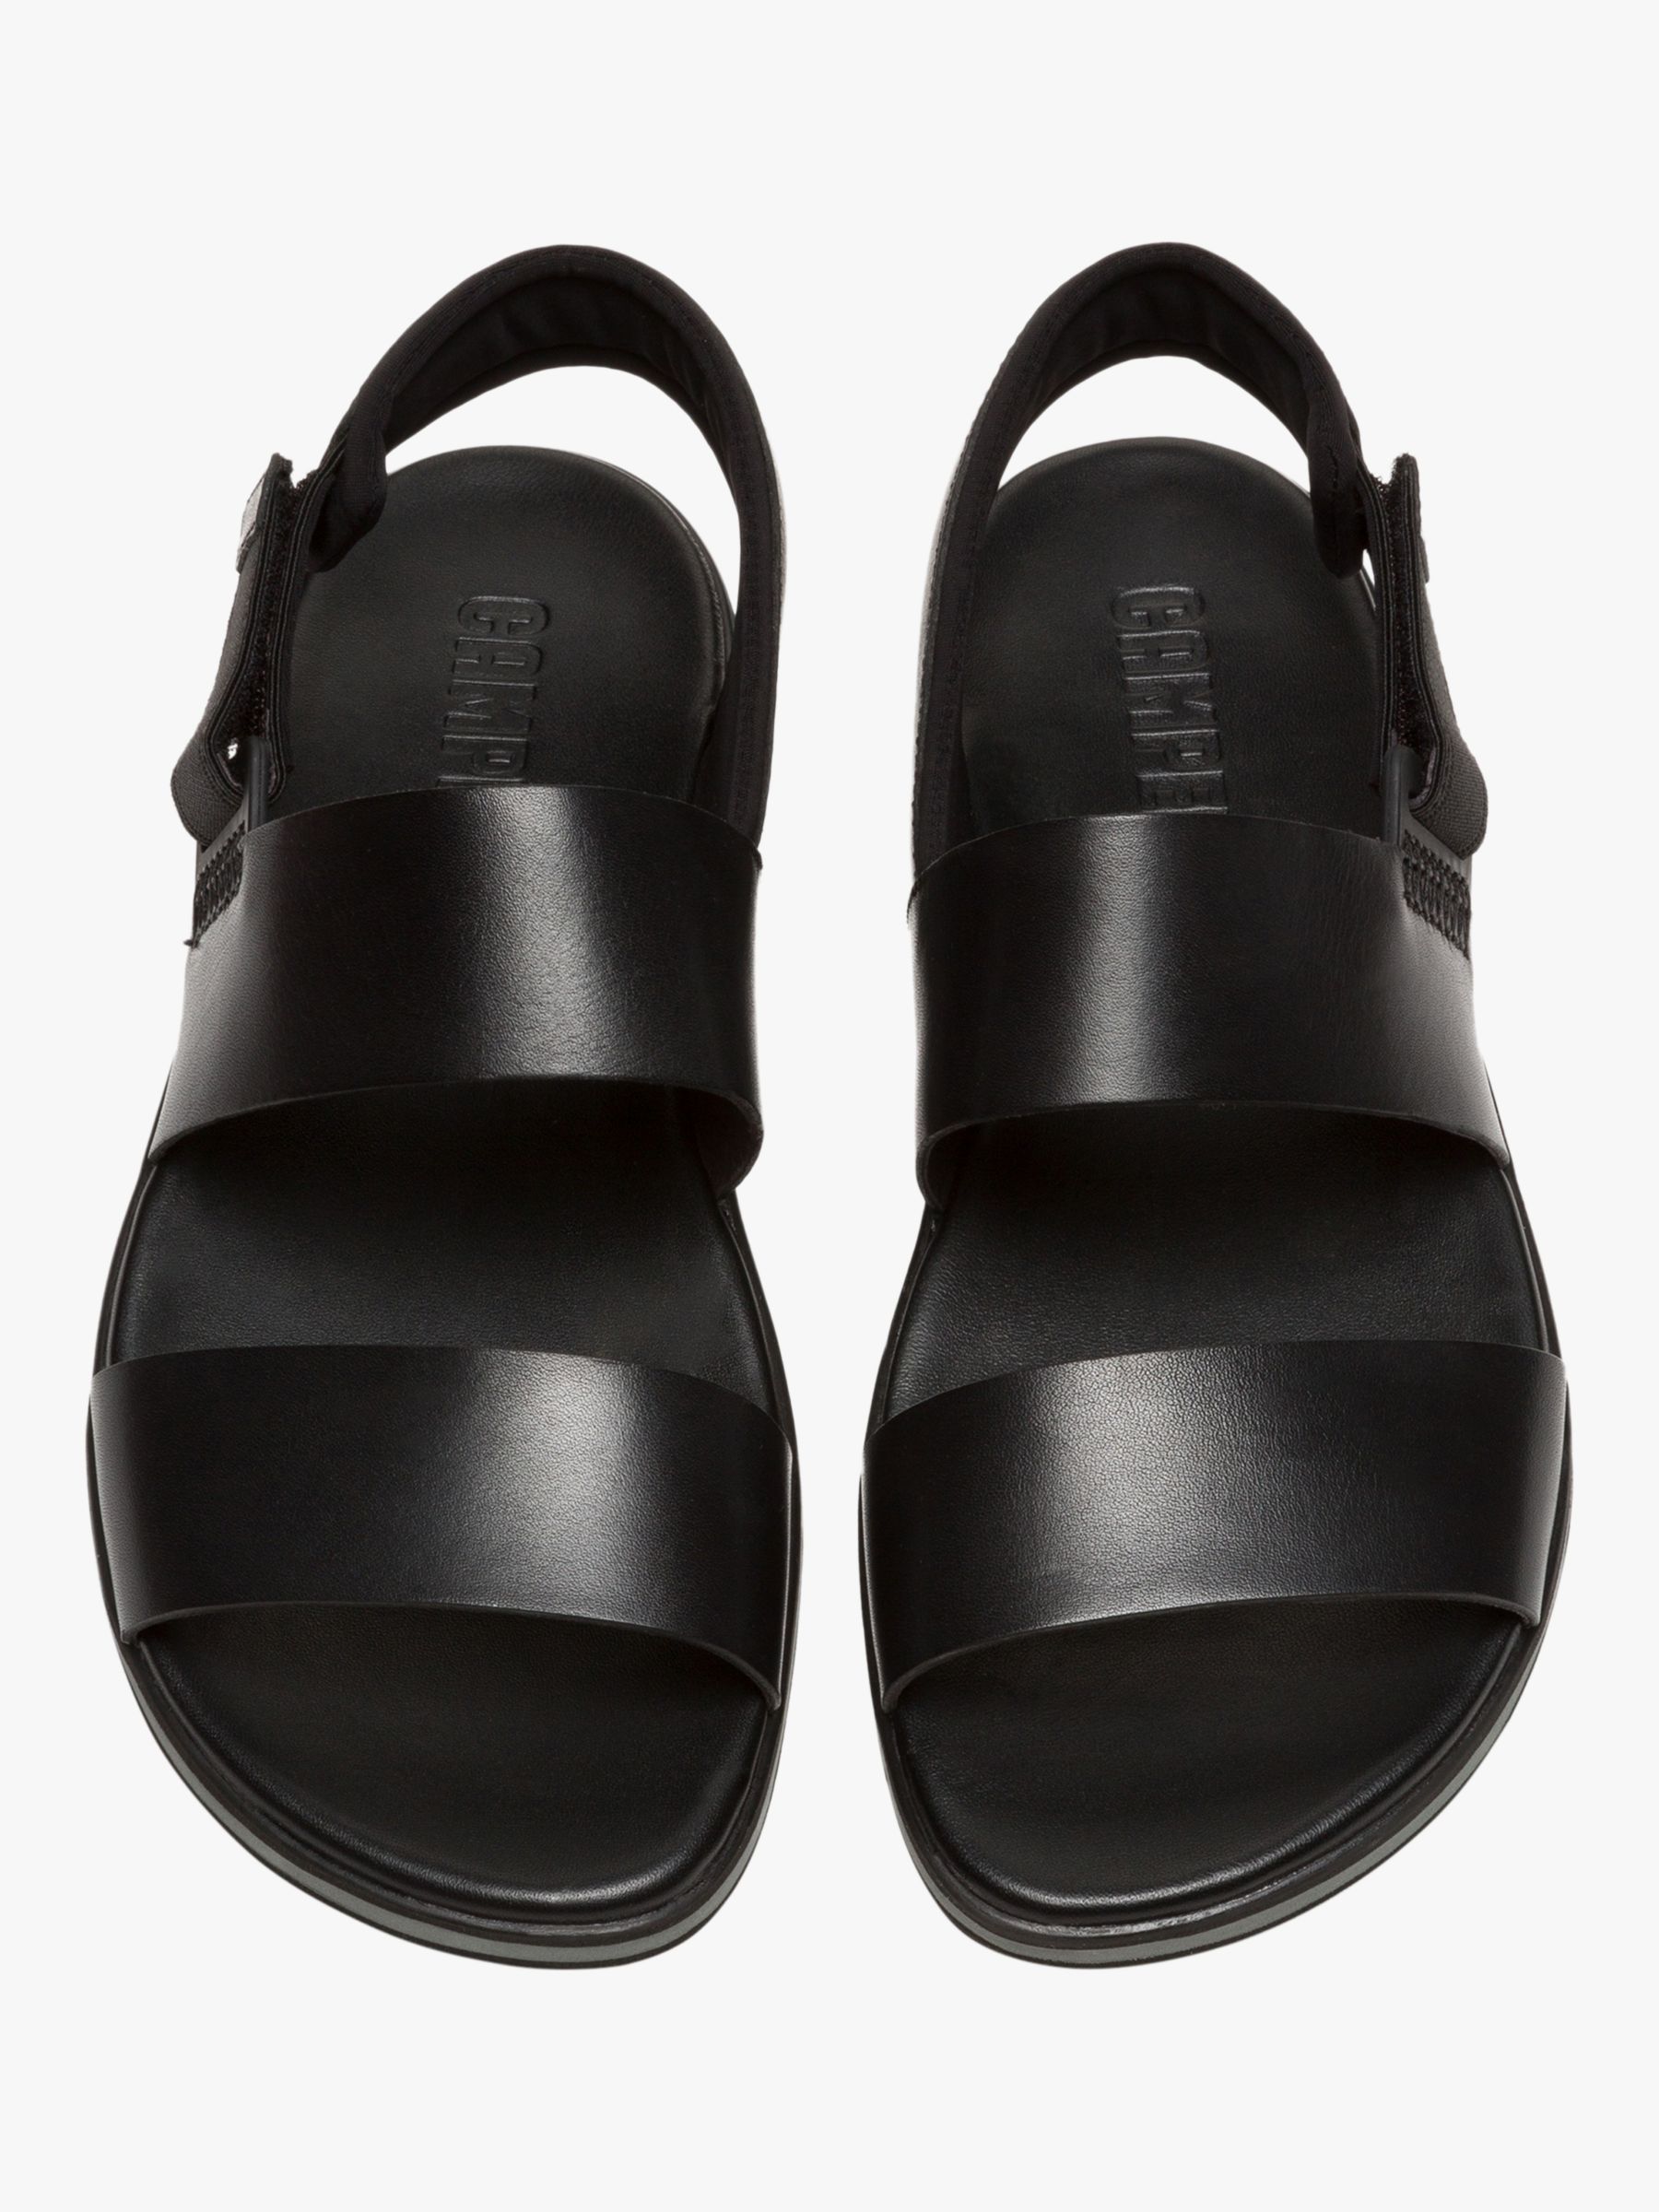 Camper Spray Strappy Leather Sandals, Black at John Lewis & Partners